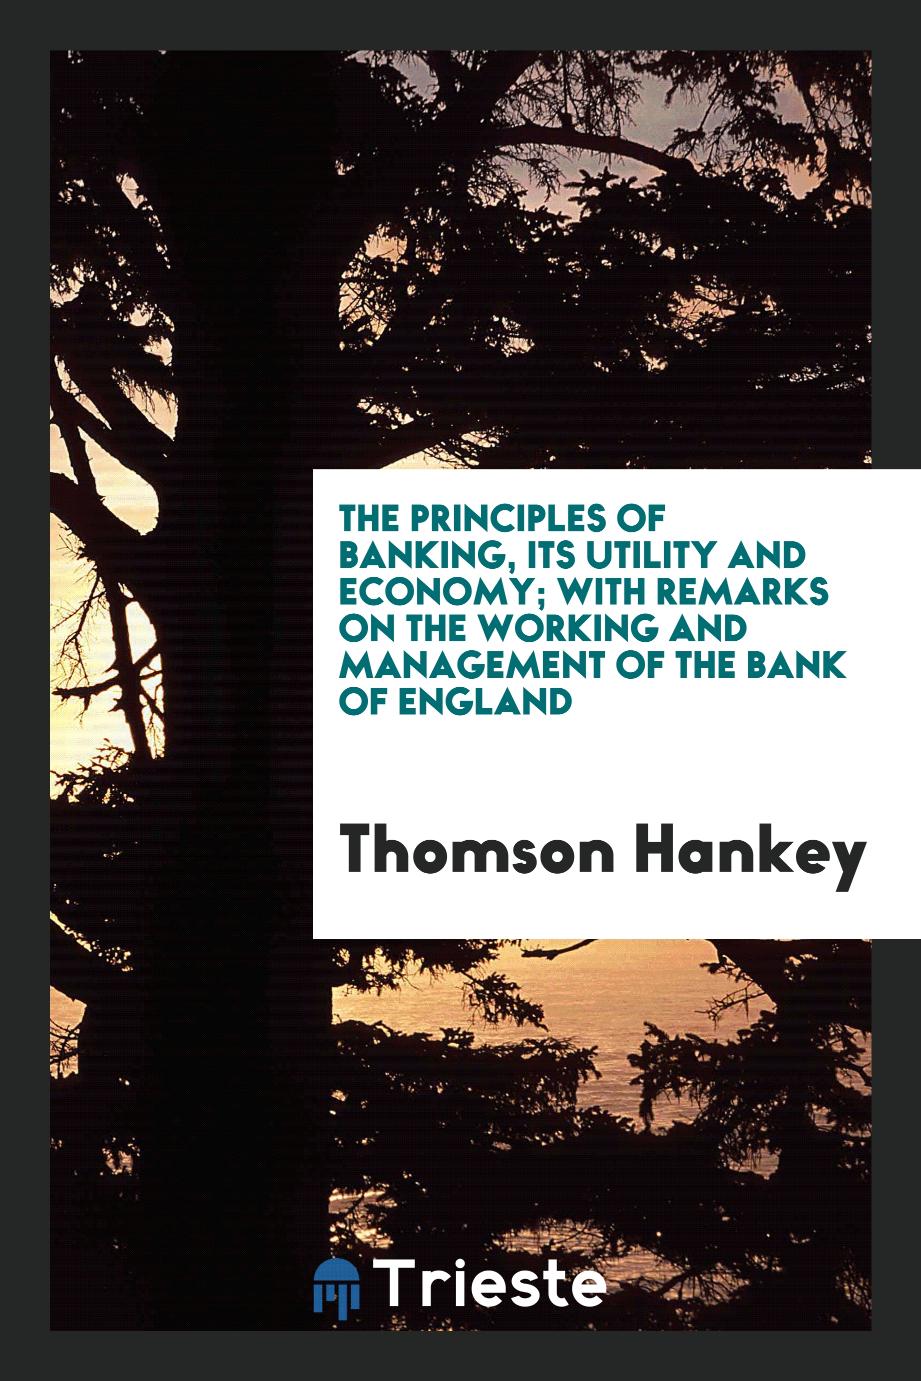 The principles of banking, its utility and economy; with remarks on the working and management of the Bank of England